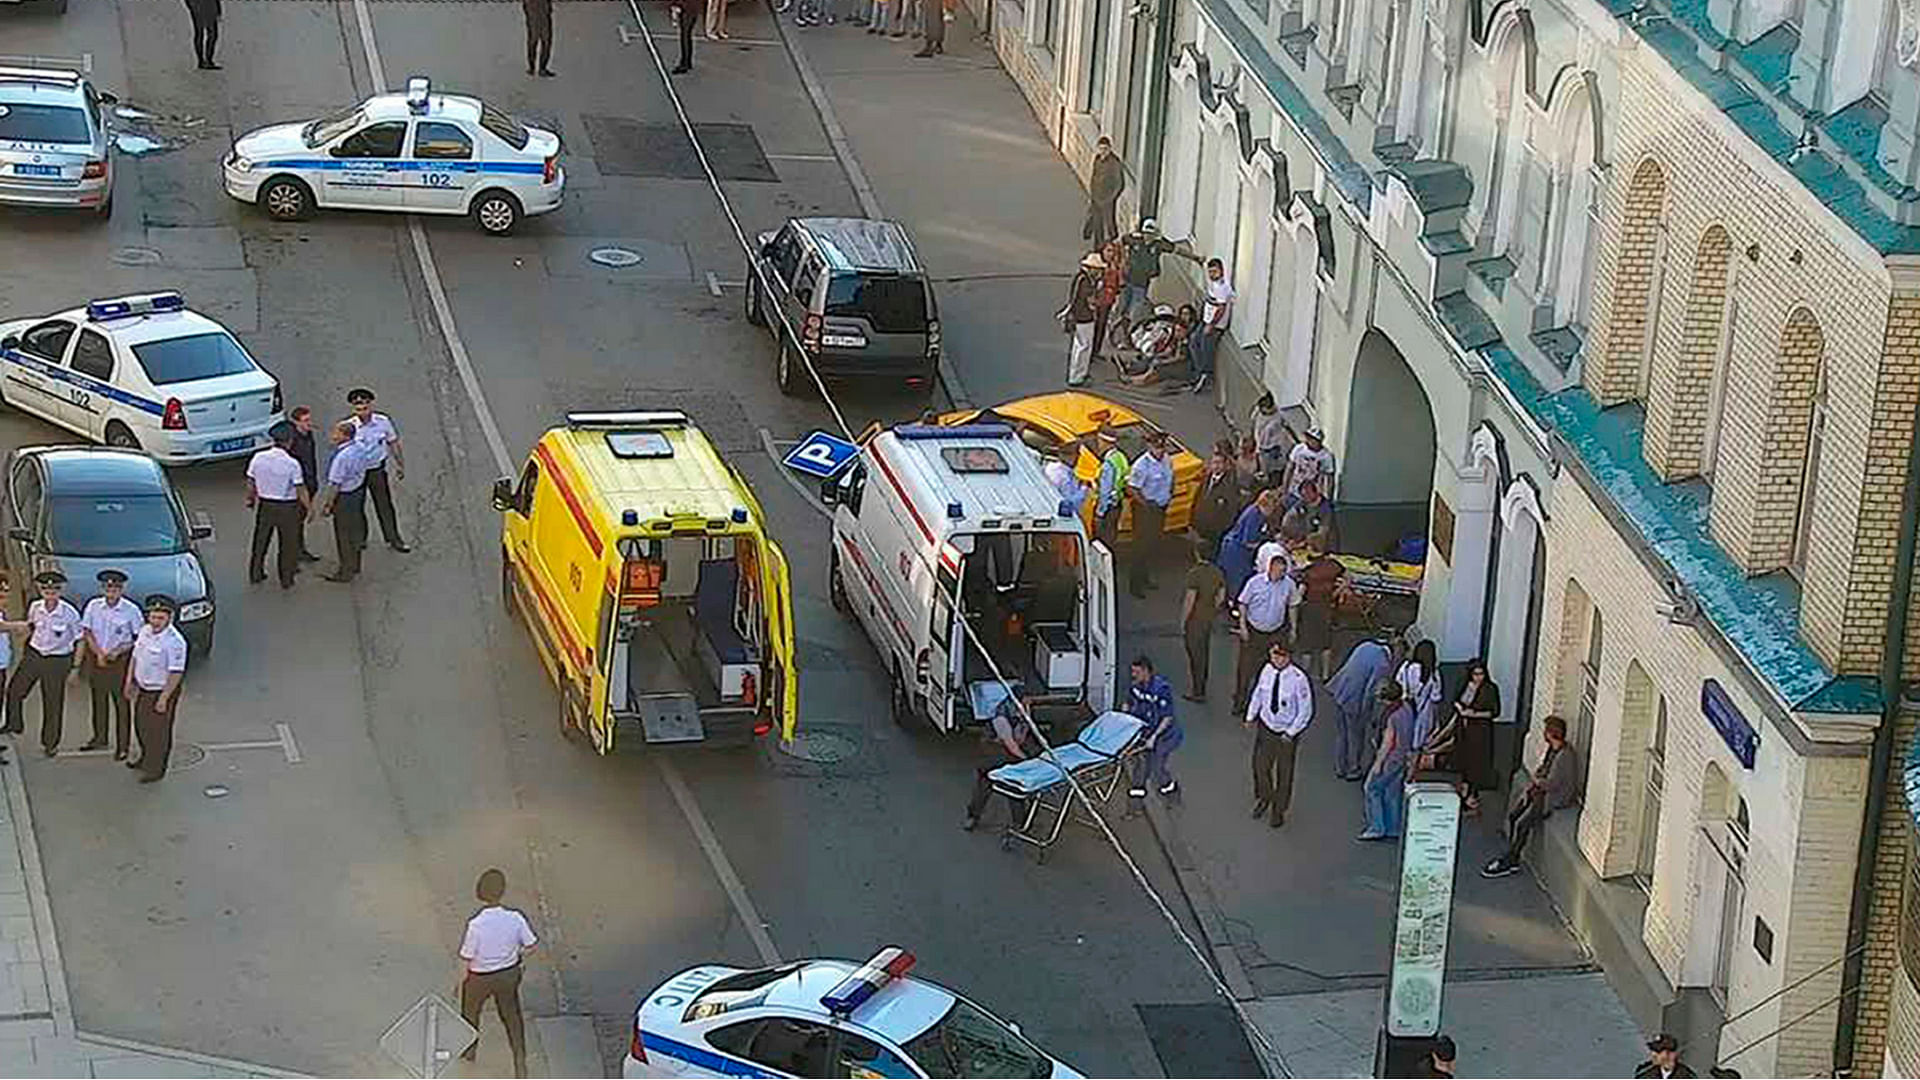 Provided by Moscow Traffic Control Center Press Service, ambulance and police work at the site of an incident involving 8 injured